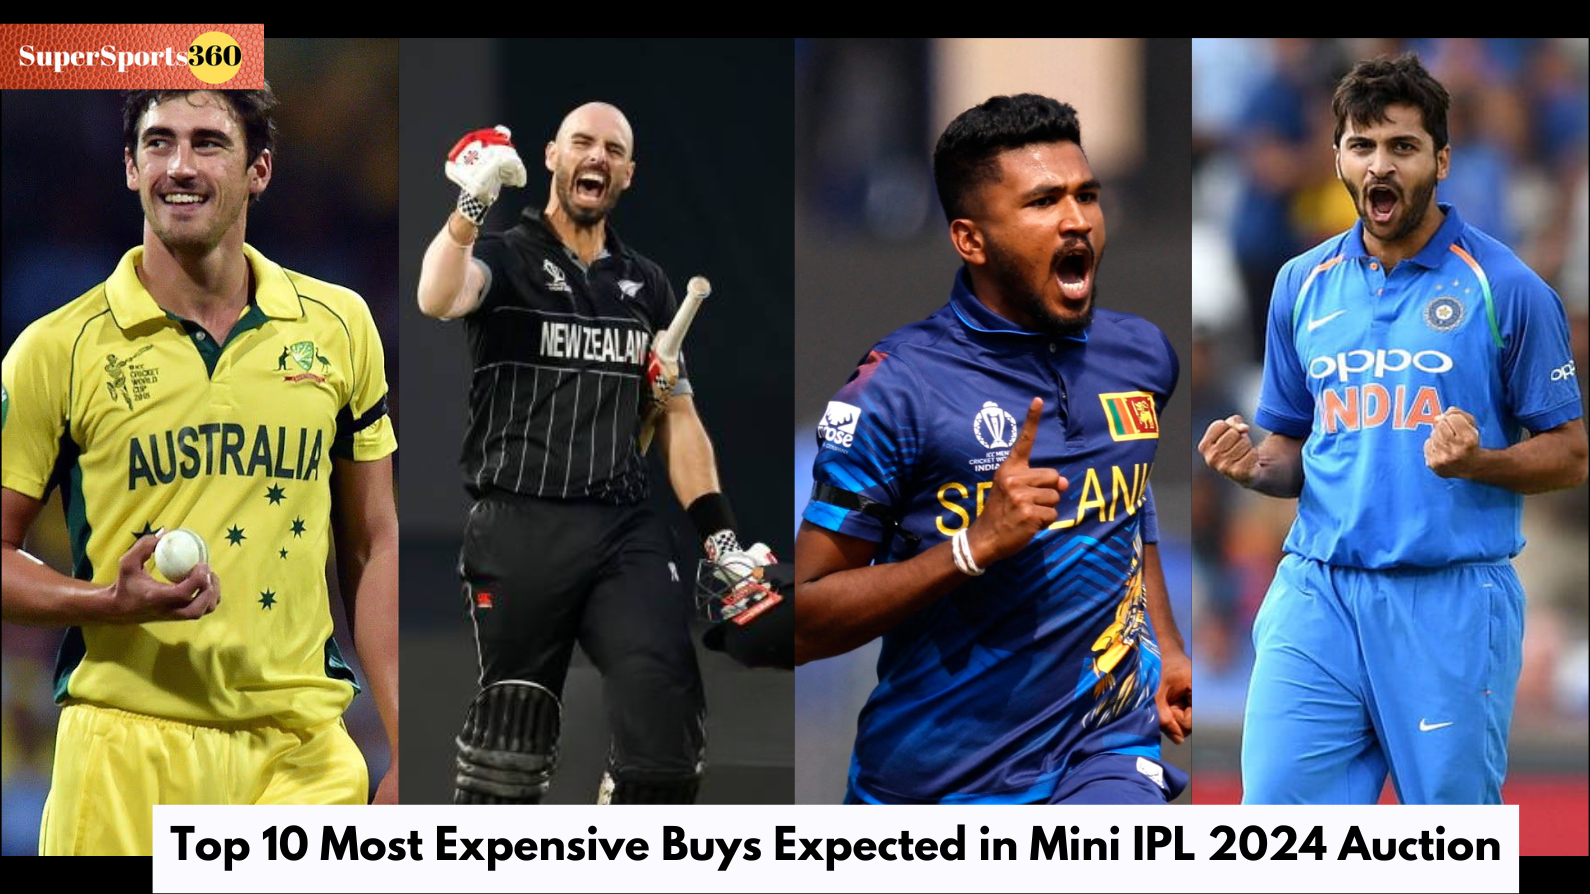 Top 10 Most Expensive Buys Expected in Mini IPL 2024 Auction